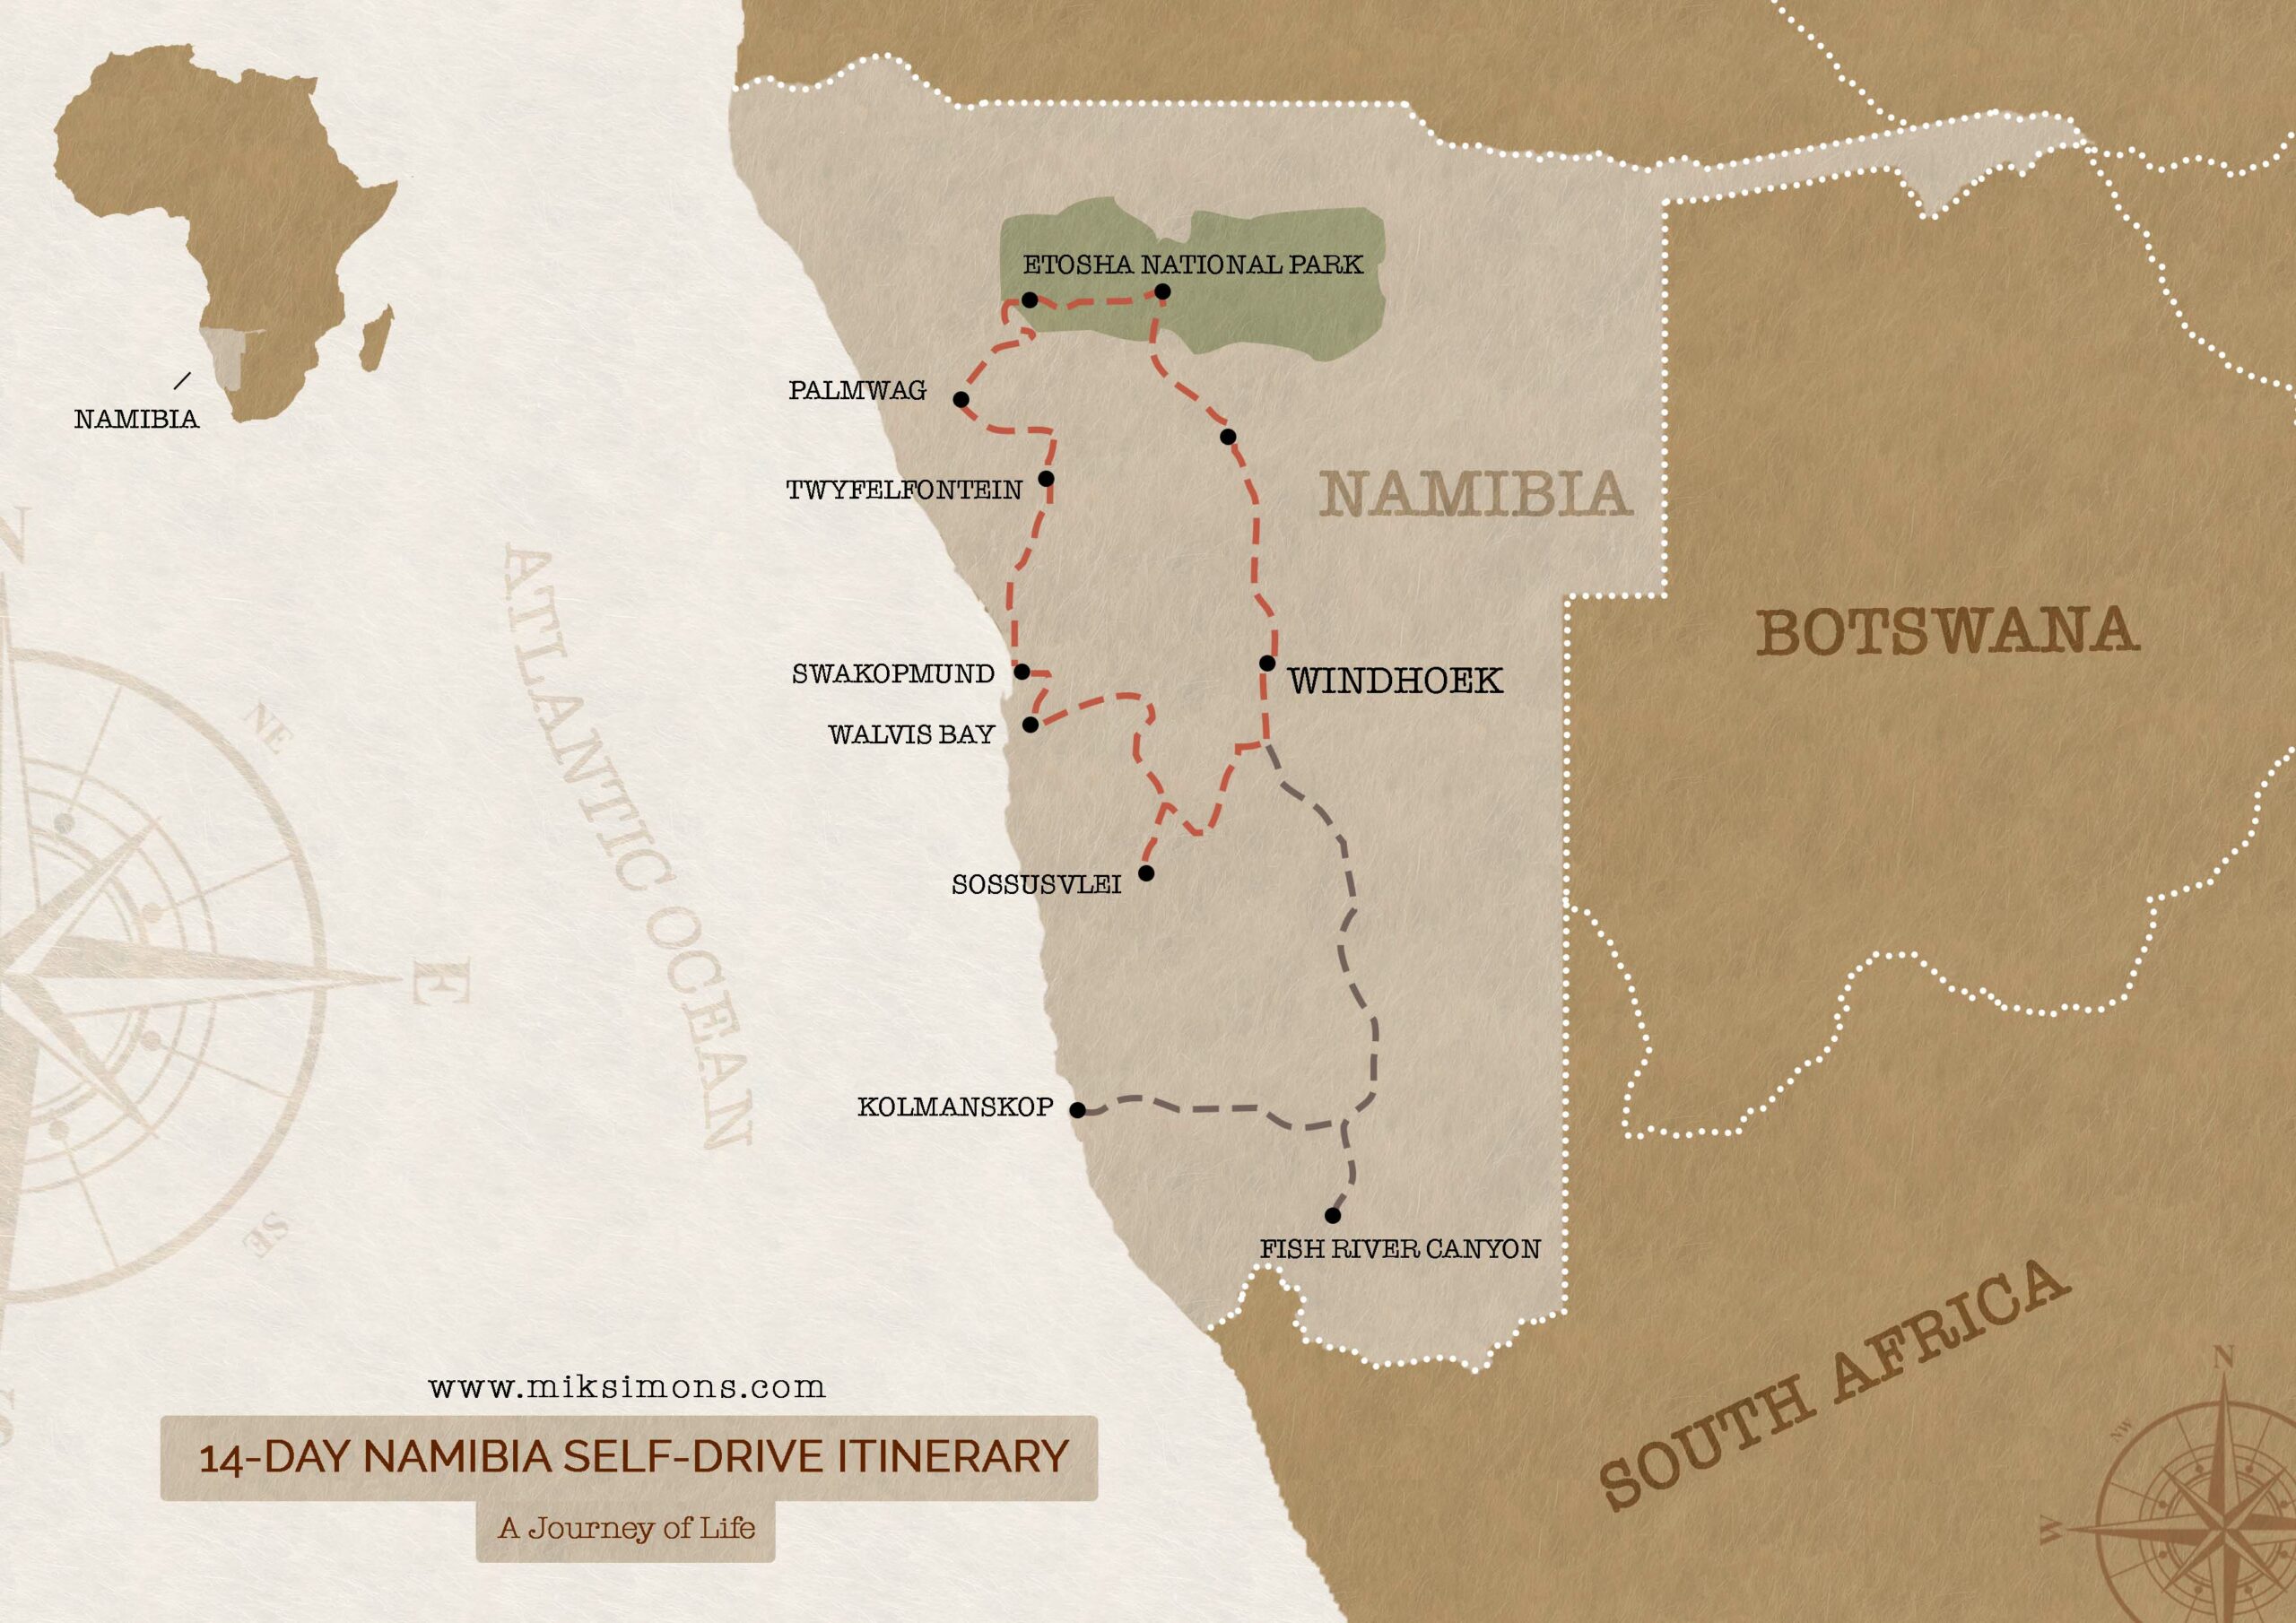 14 day Namibia self drive Itinerary 2022 - Adventure Map of Namibia